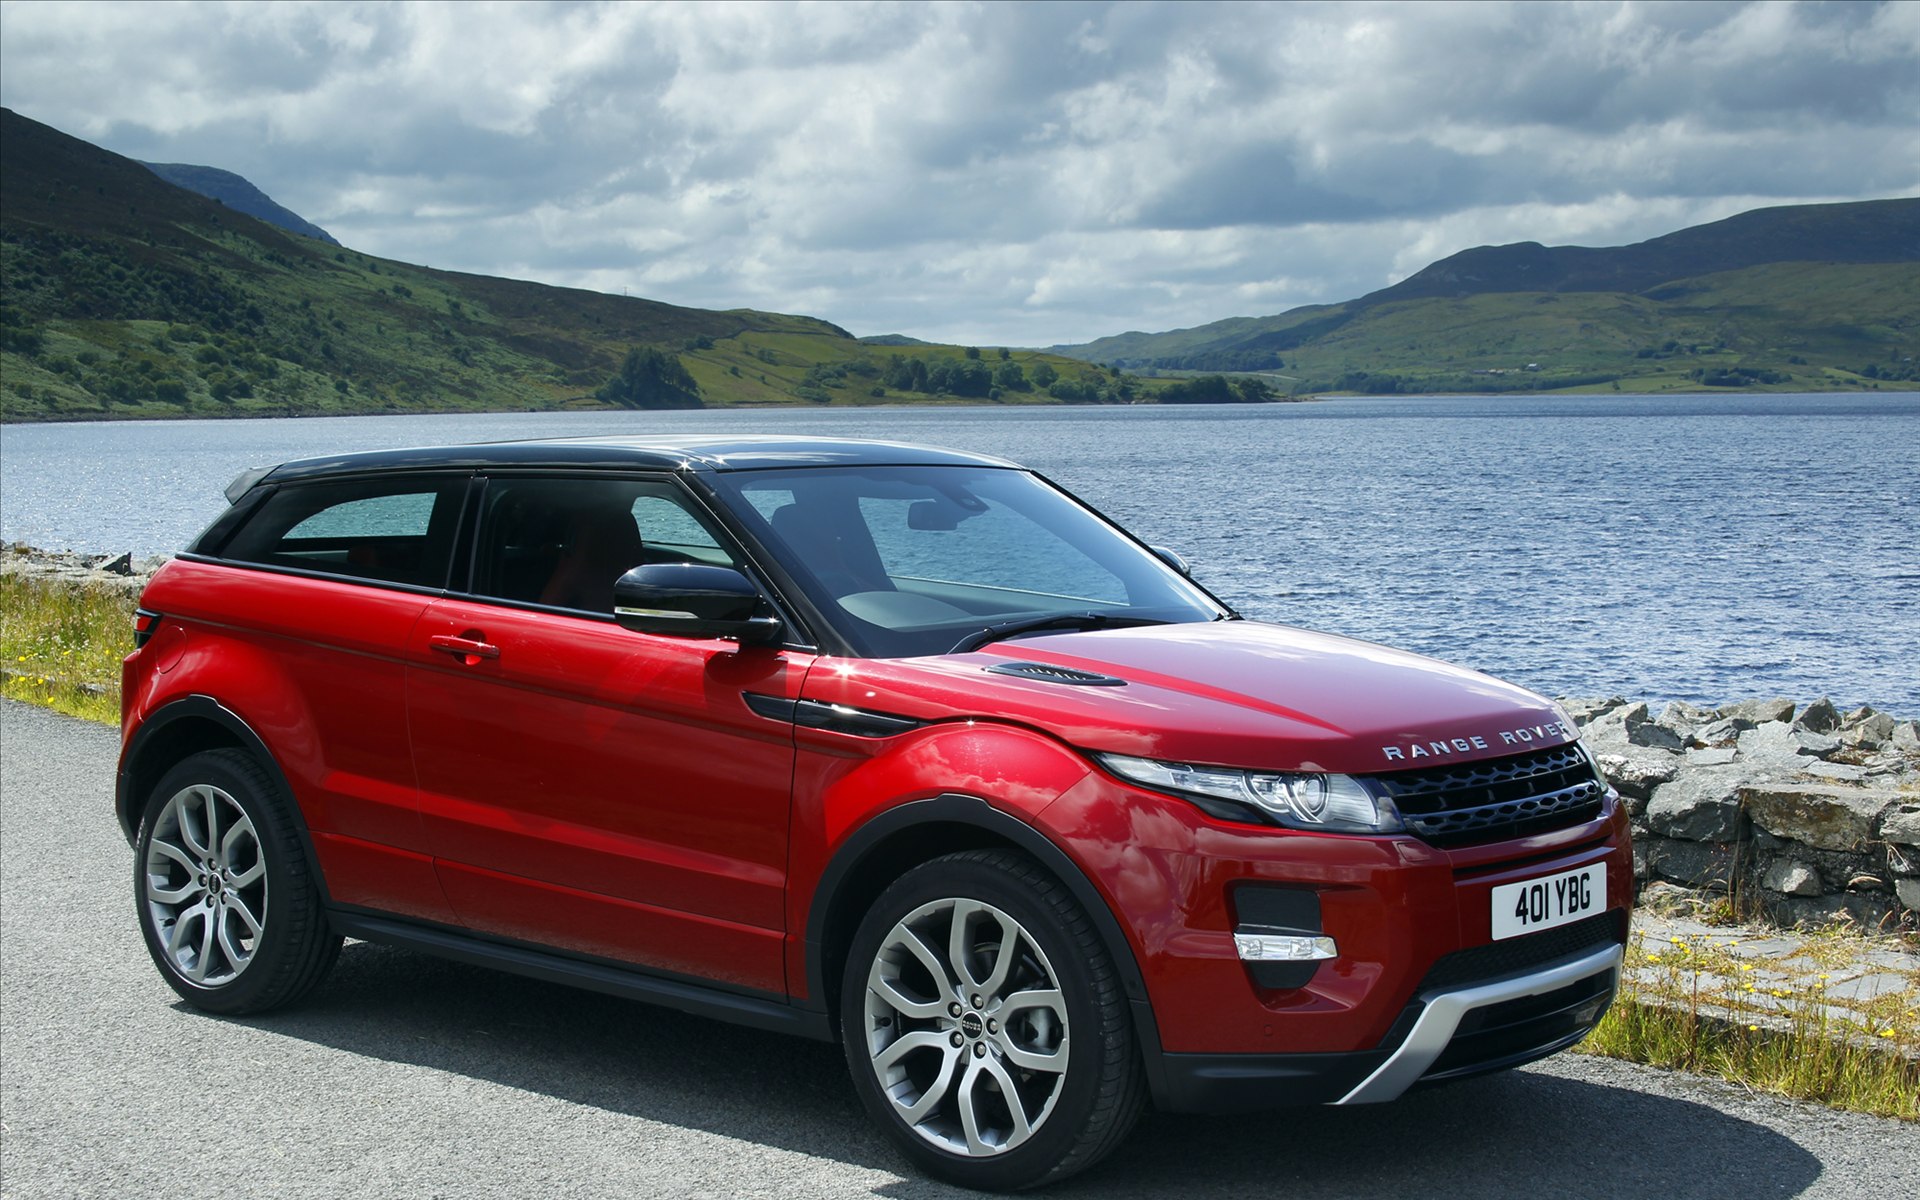 Jaguar Land Rover Limited to Build Engine Plant in China - Ducoo